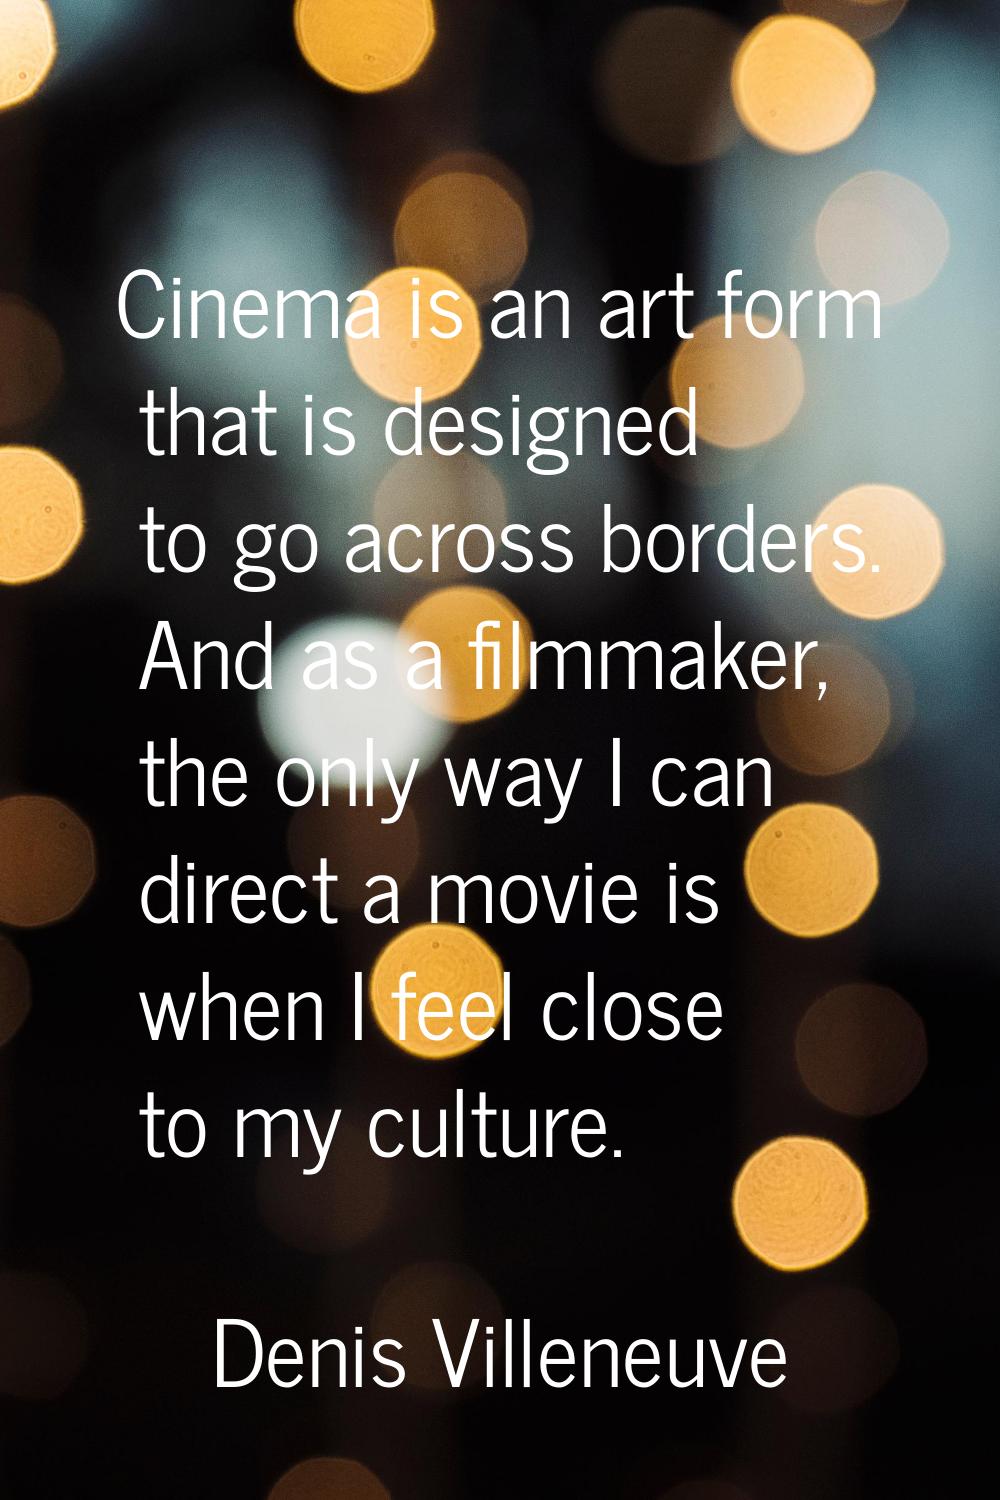 Cinema is an art form that is designed to go across borders. And as a filmmaker, the only way I can